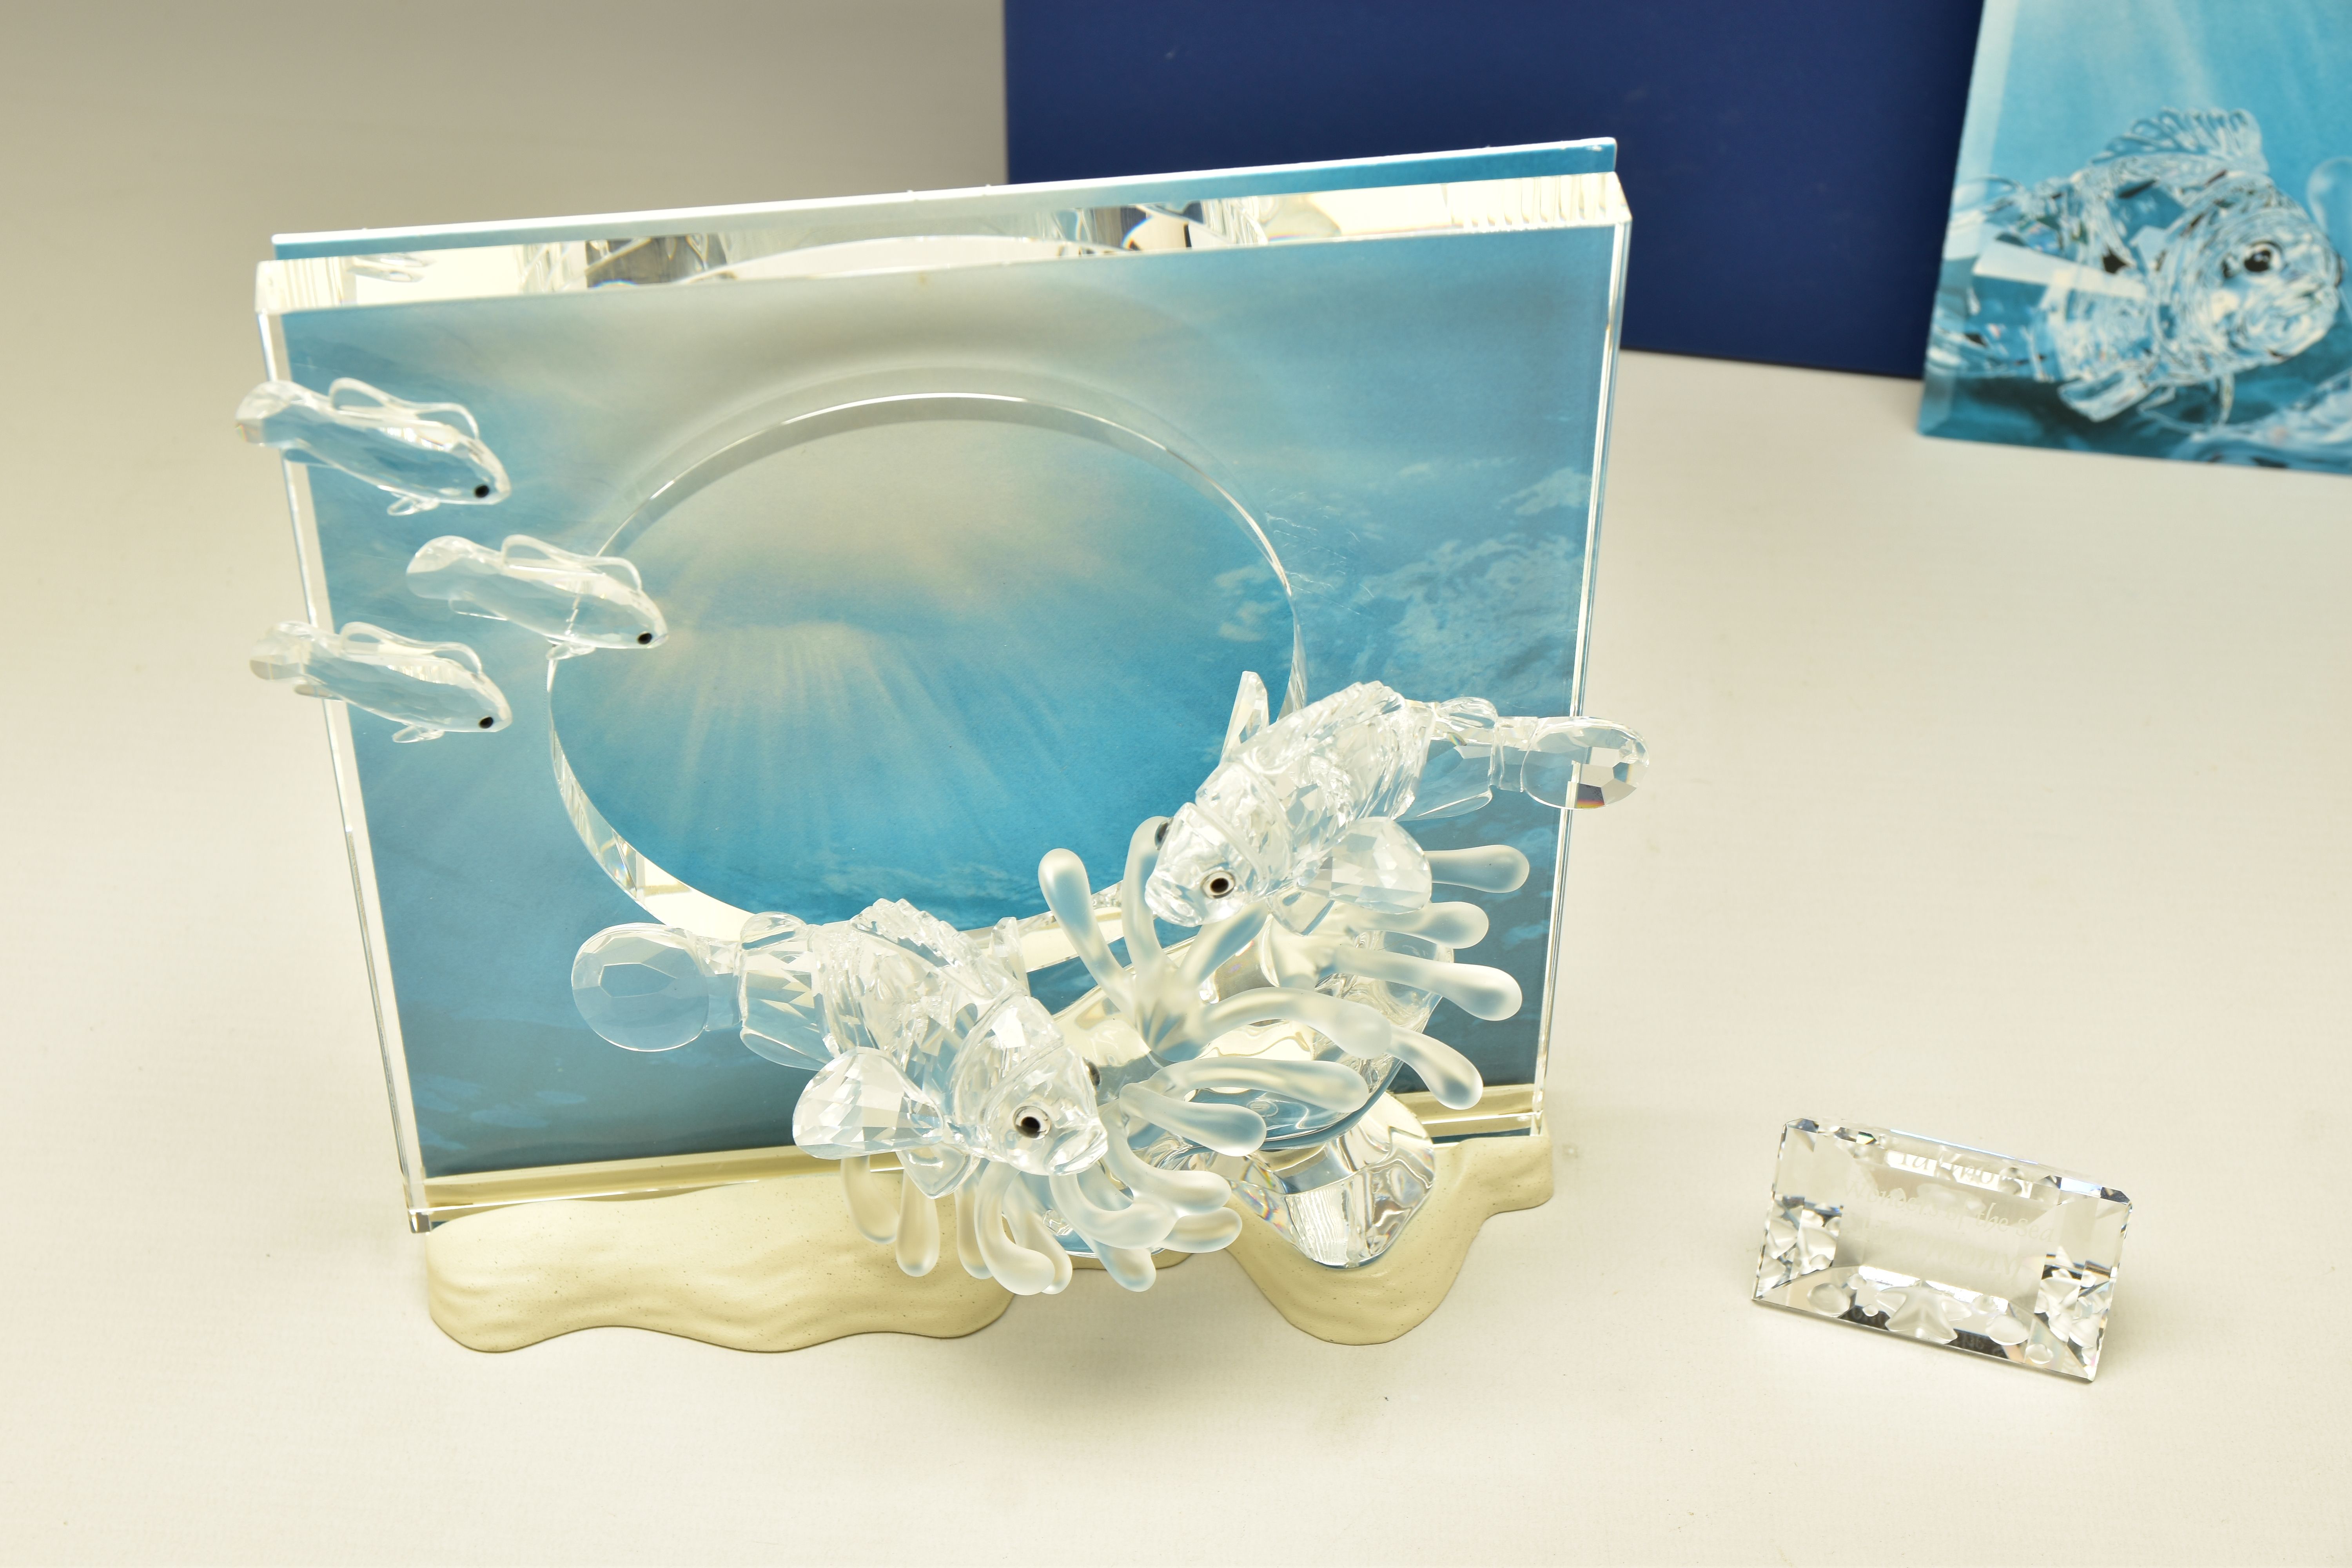 A BOXED SWAROVSKI CRYSTAL SOCIETY DIORAMA, FIRST PIECE OF THE TRILOGY WONDERS OF THE SEA - - Image 3 of 5